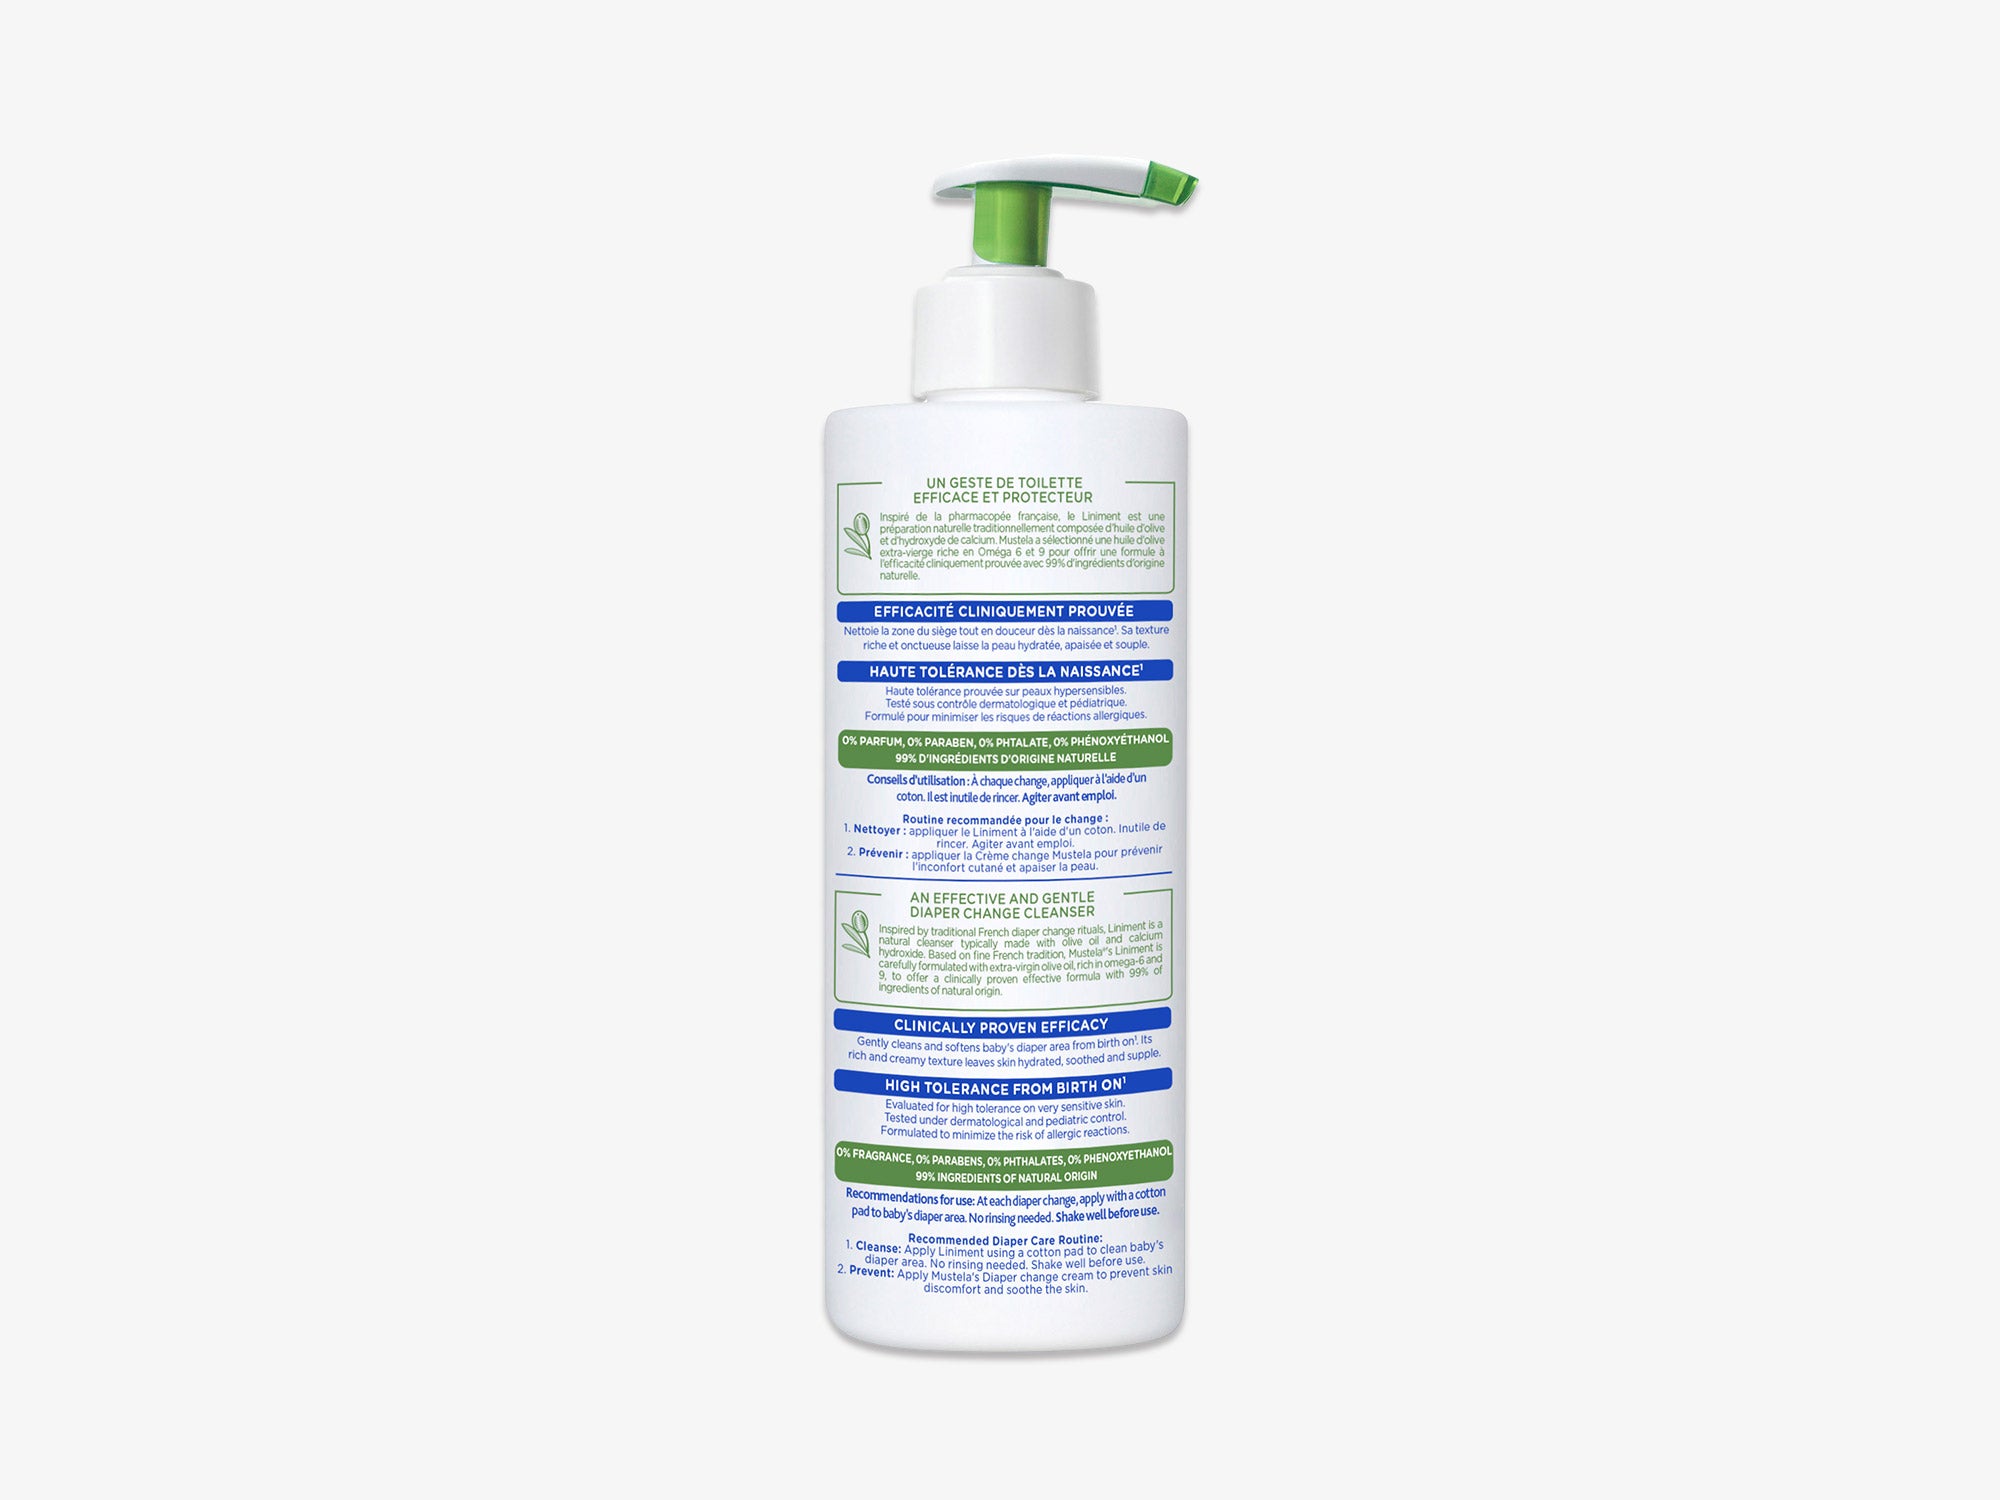 Liniment - Fragrance-Free Diaper Change Cleanser